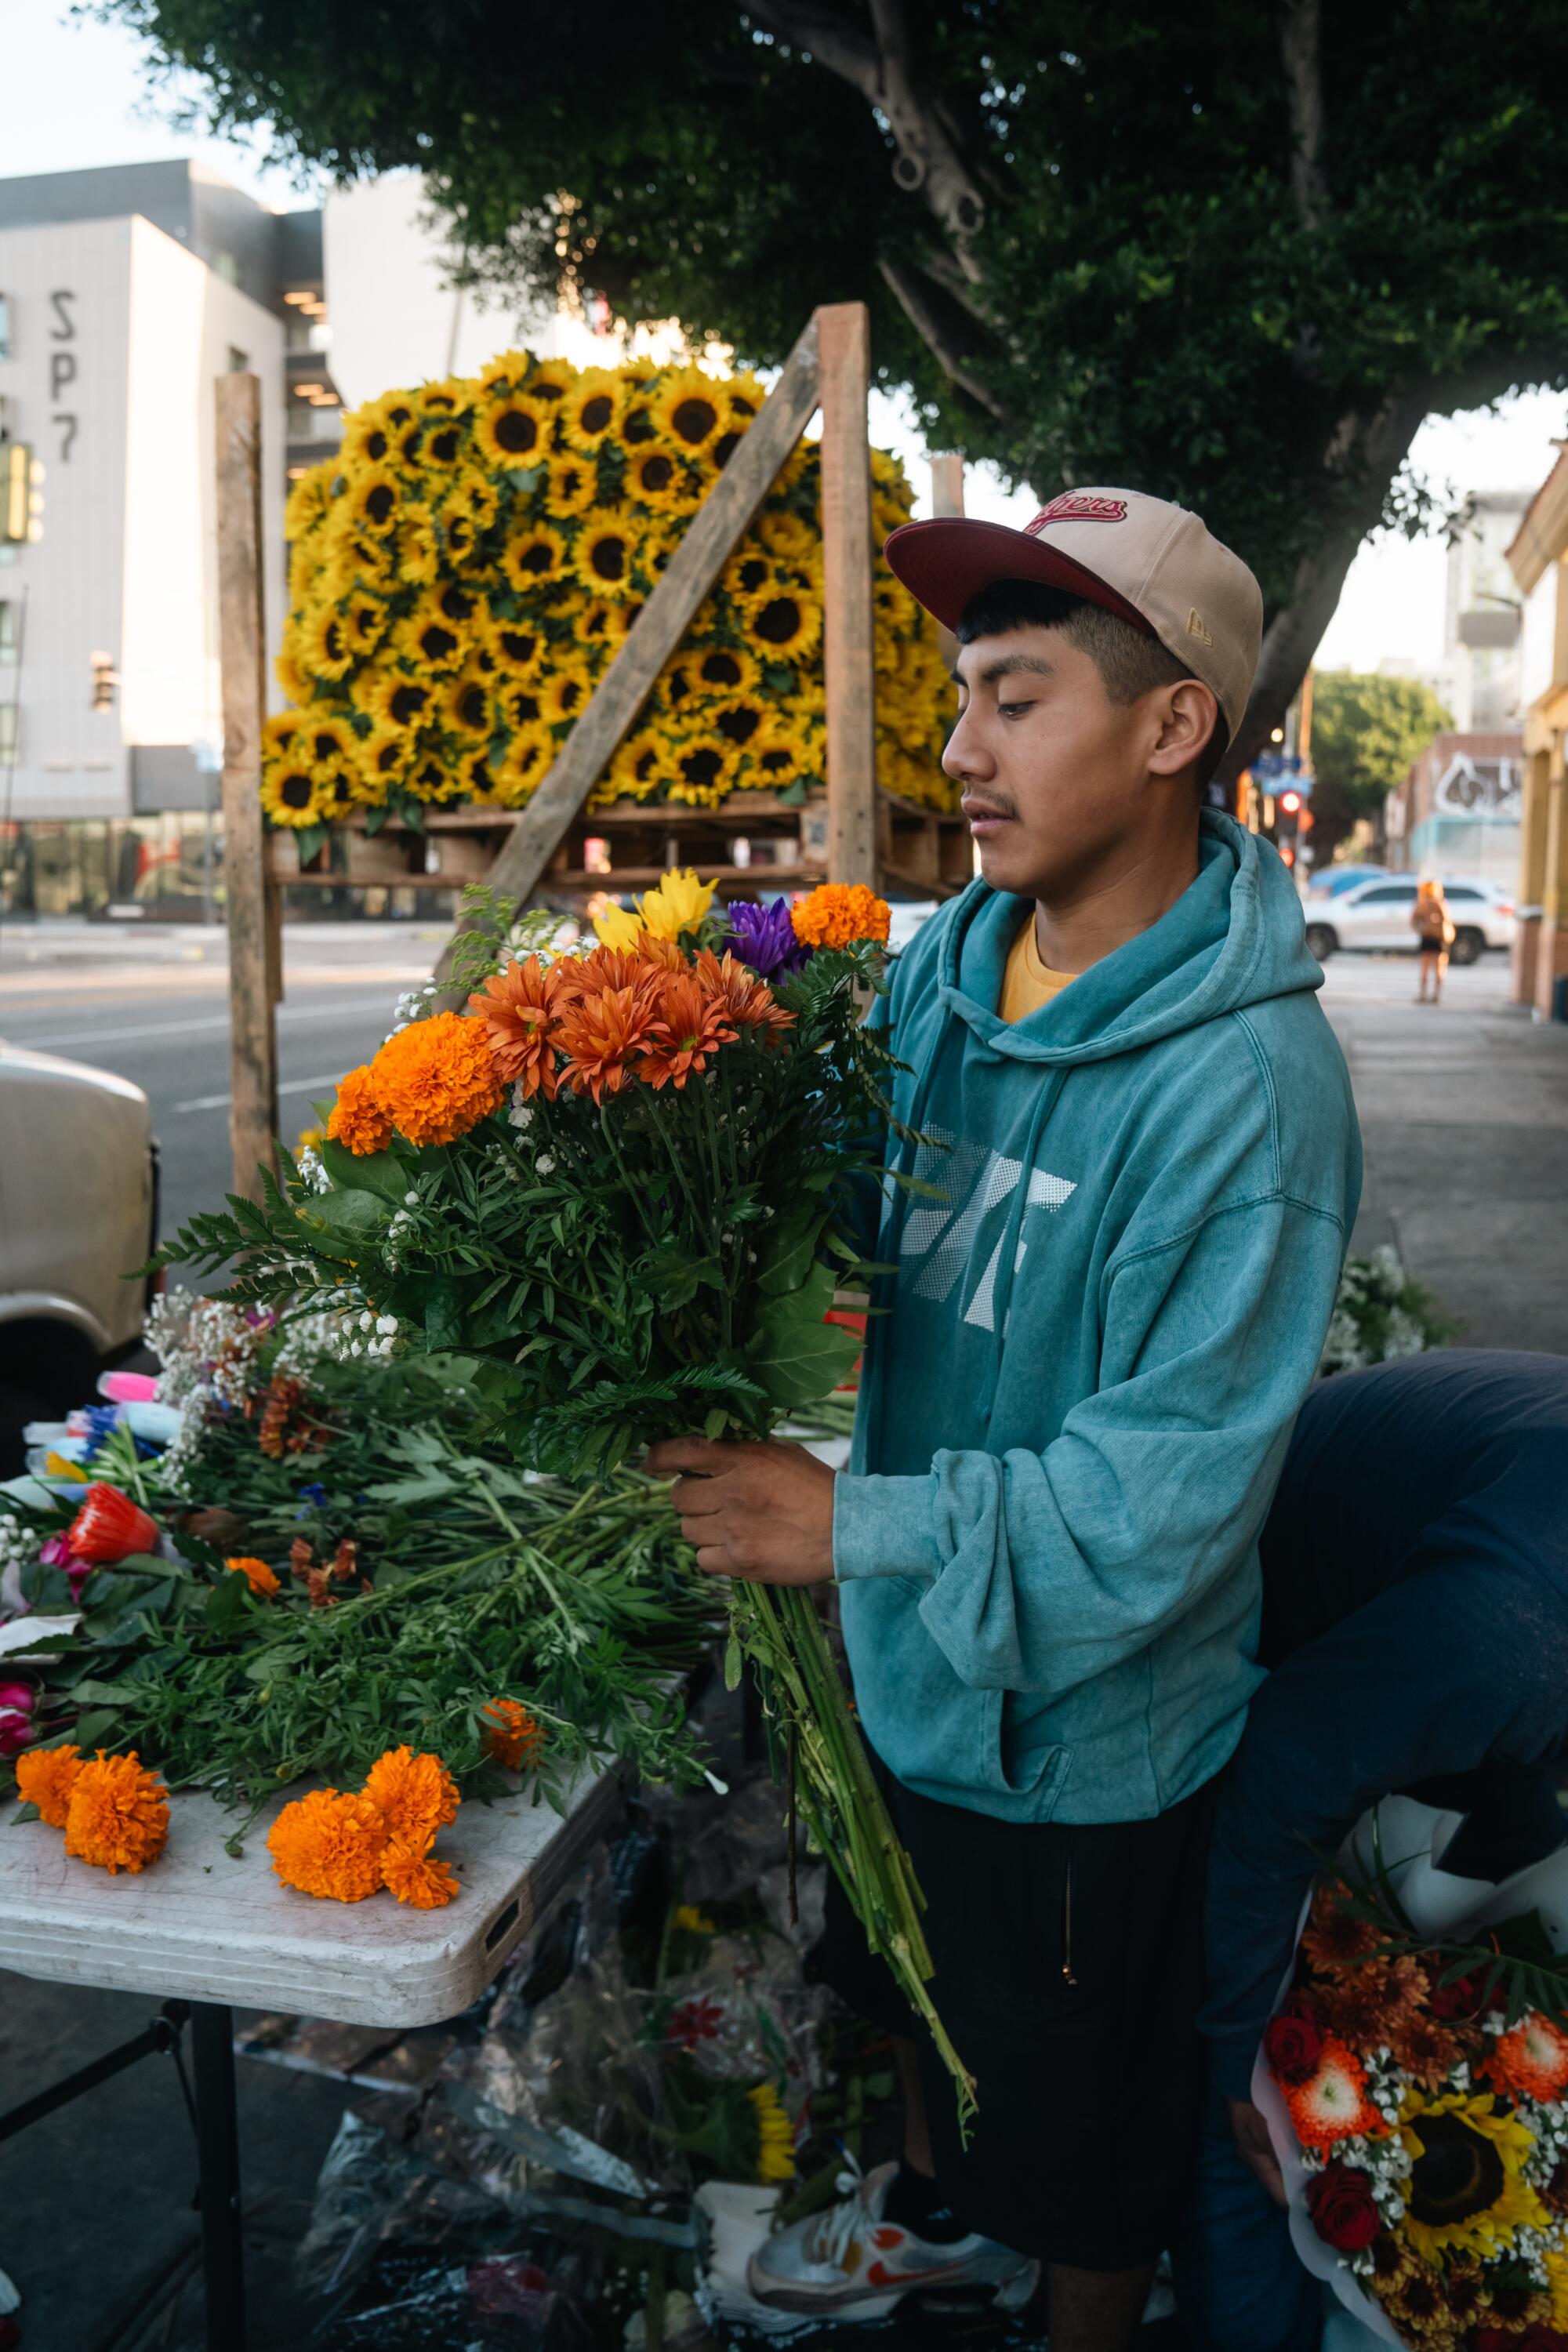 Worker Emmanuel Carrisoza prepares vibrant ready-to-go bouquets.